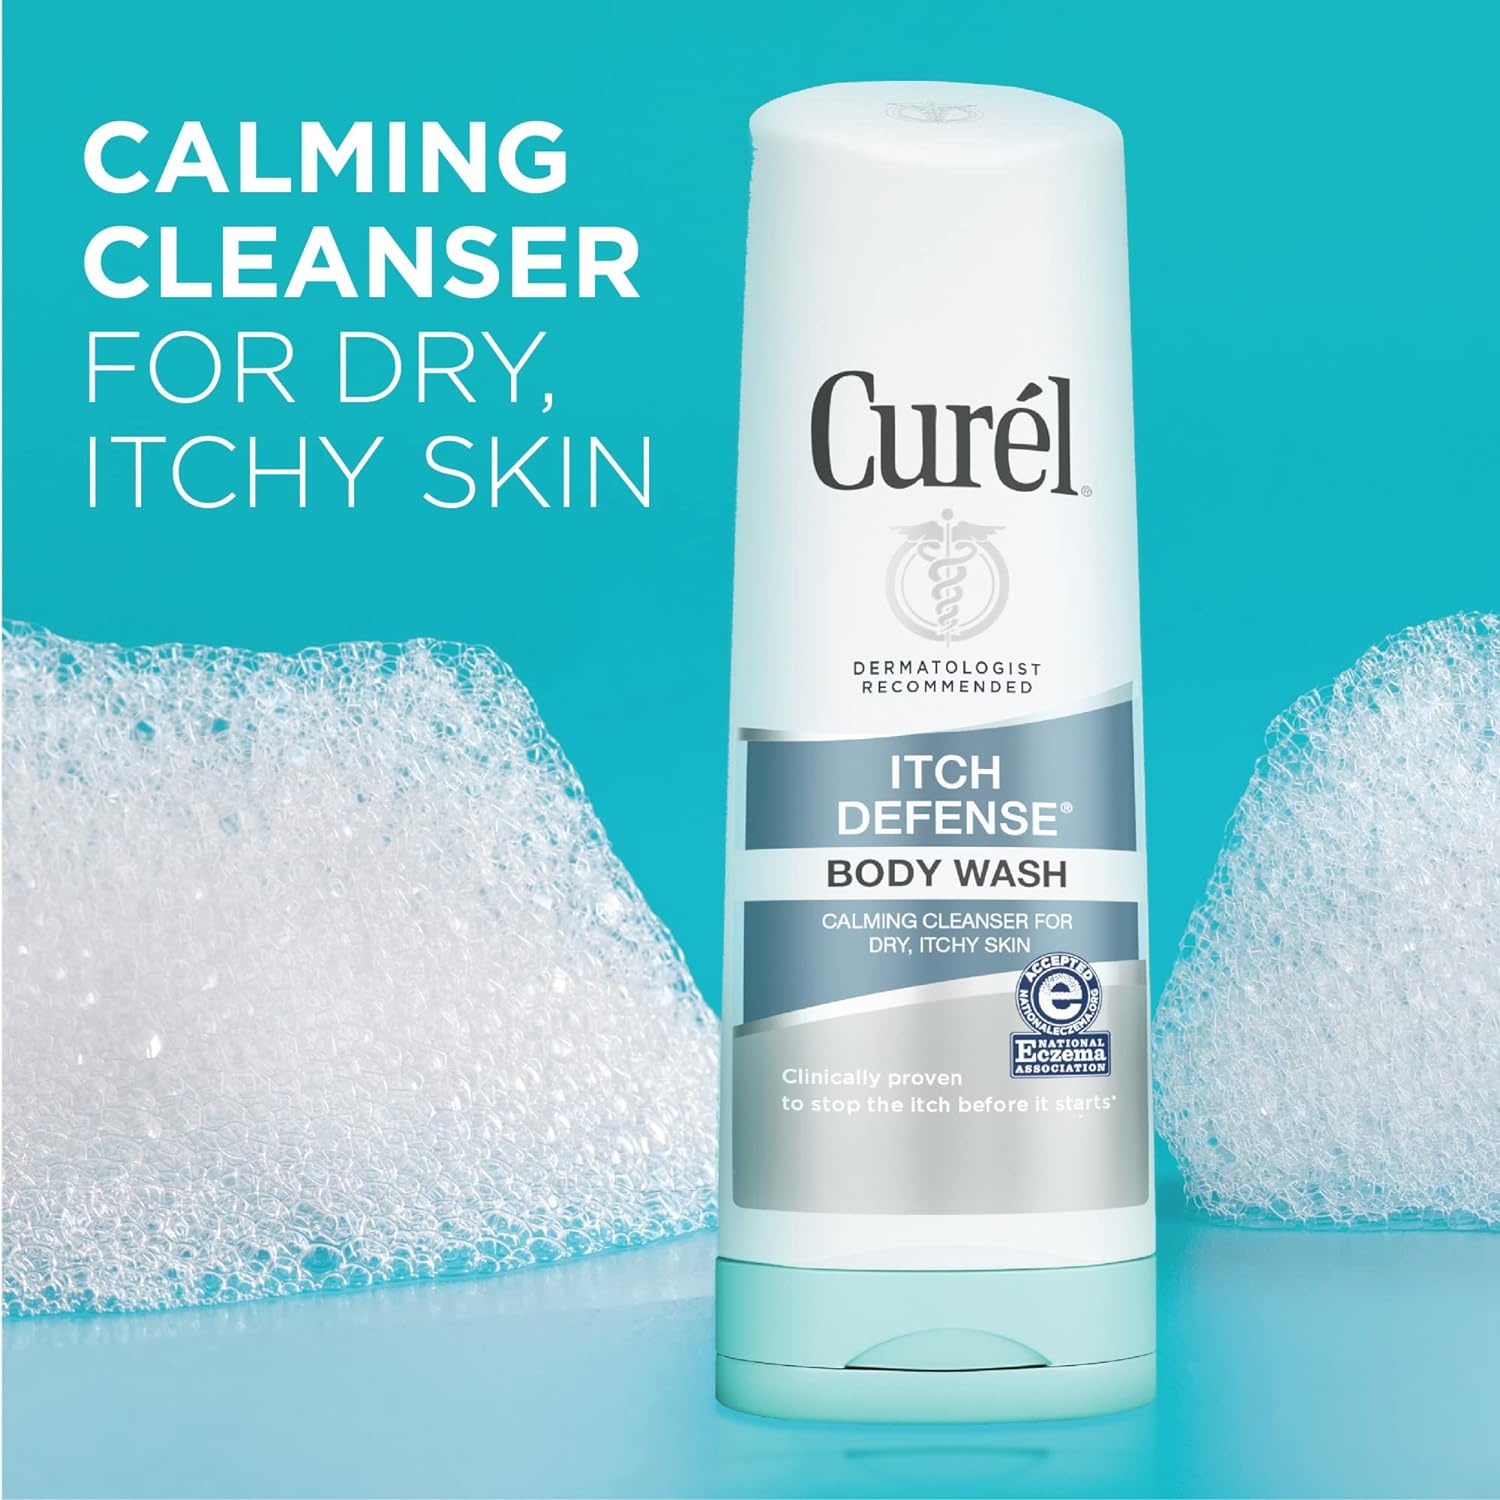 Curel Hydra Therapy Itch Defense Moisturizer and Body Wash Set,Wet Skin Lotion,+Curél Itch Defense Calming Daily Cleanser,Body Wash, Soap-free Formula,for Dry,Itchy Skin,12 fl oz&10 fl oz,2Piece set : Beauty & Personal Care